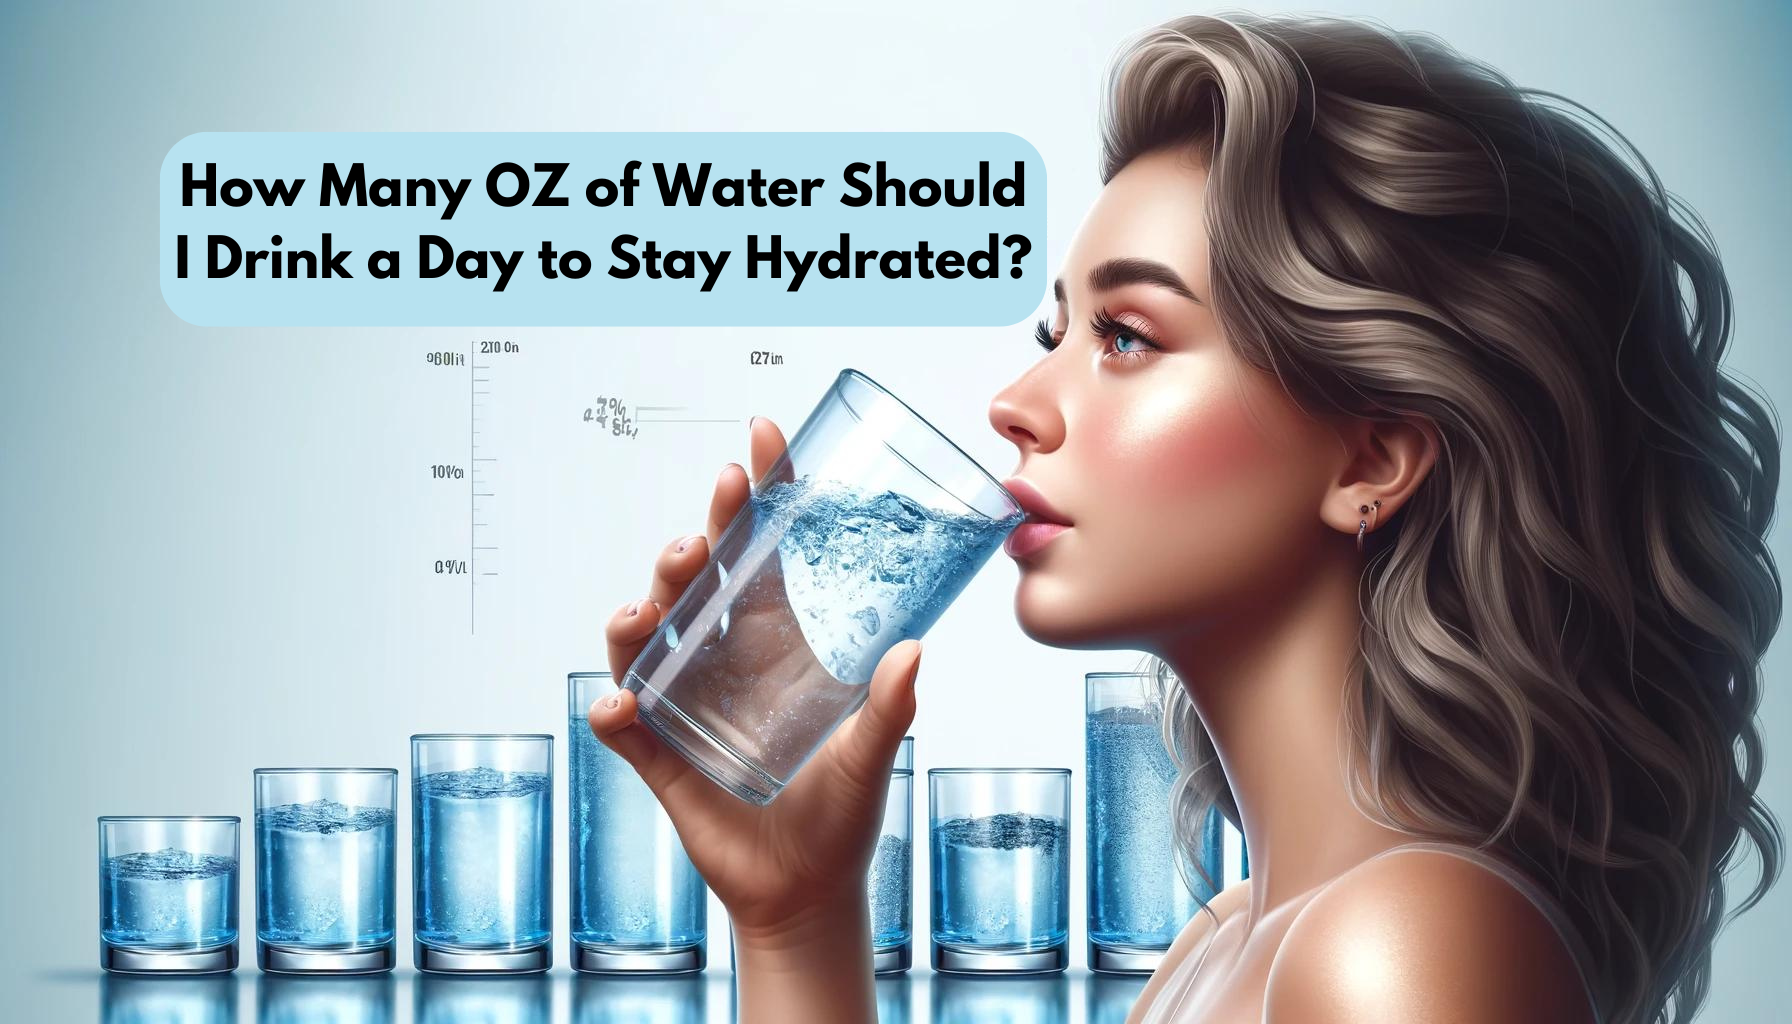 How Many OZ of Water Should I Drink a Day to Stay Hydrated?